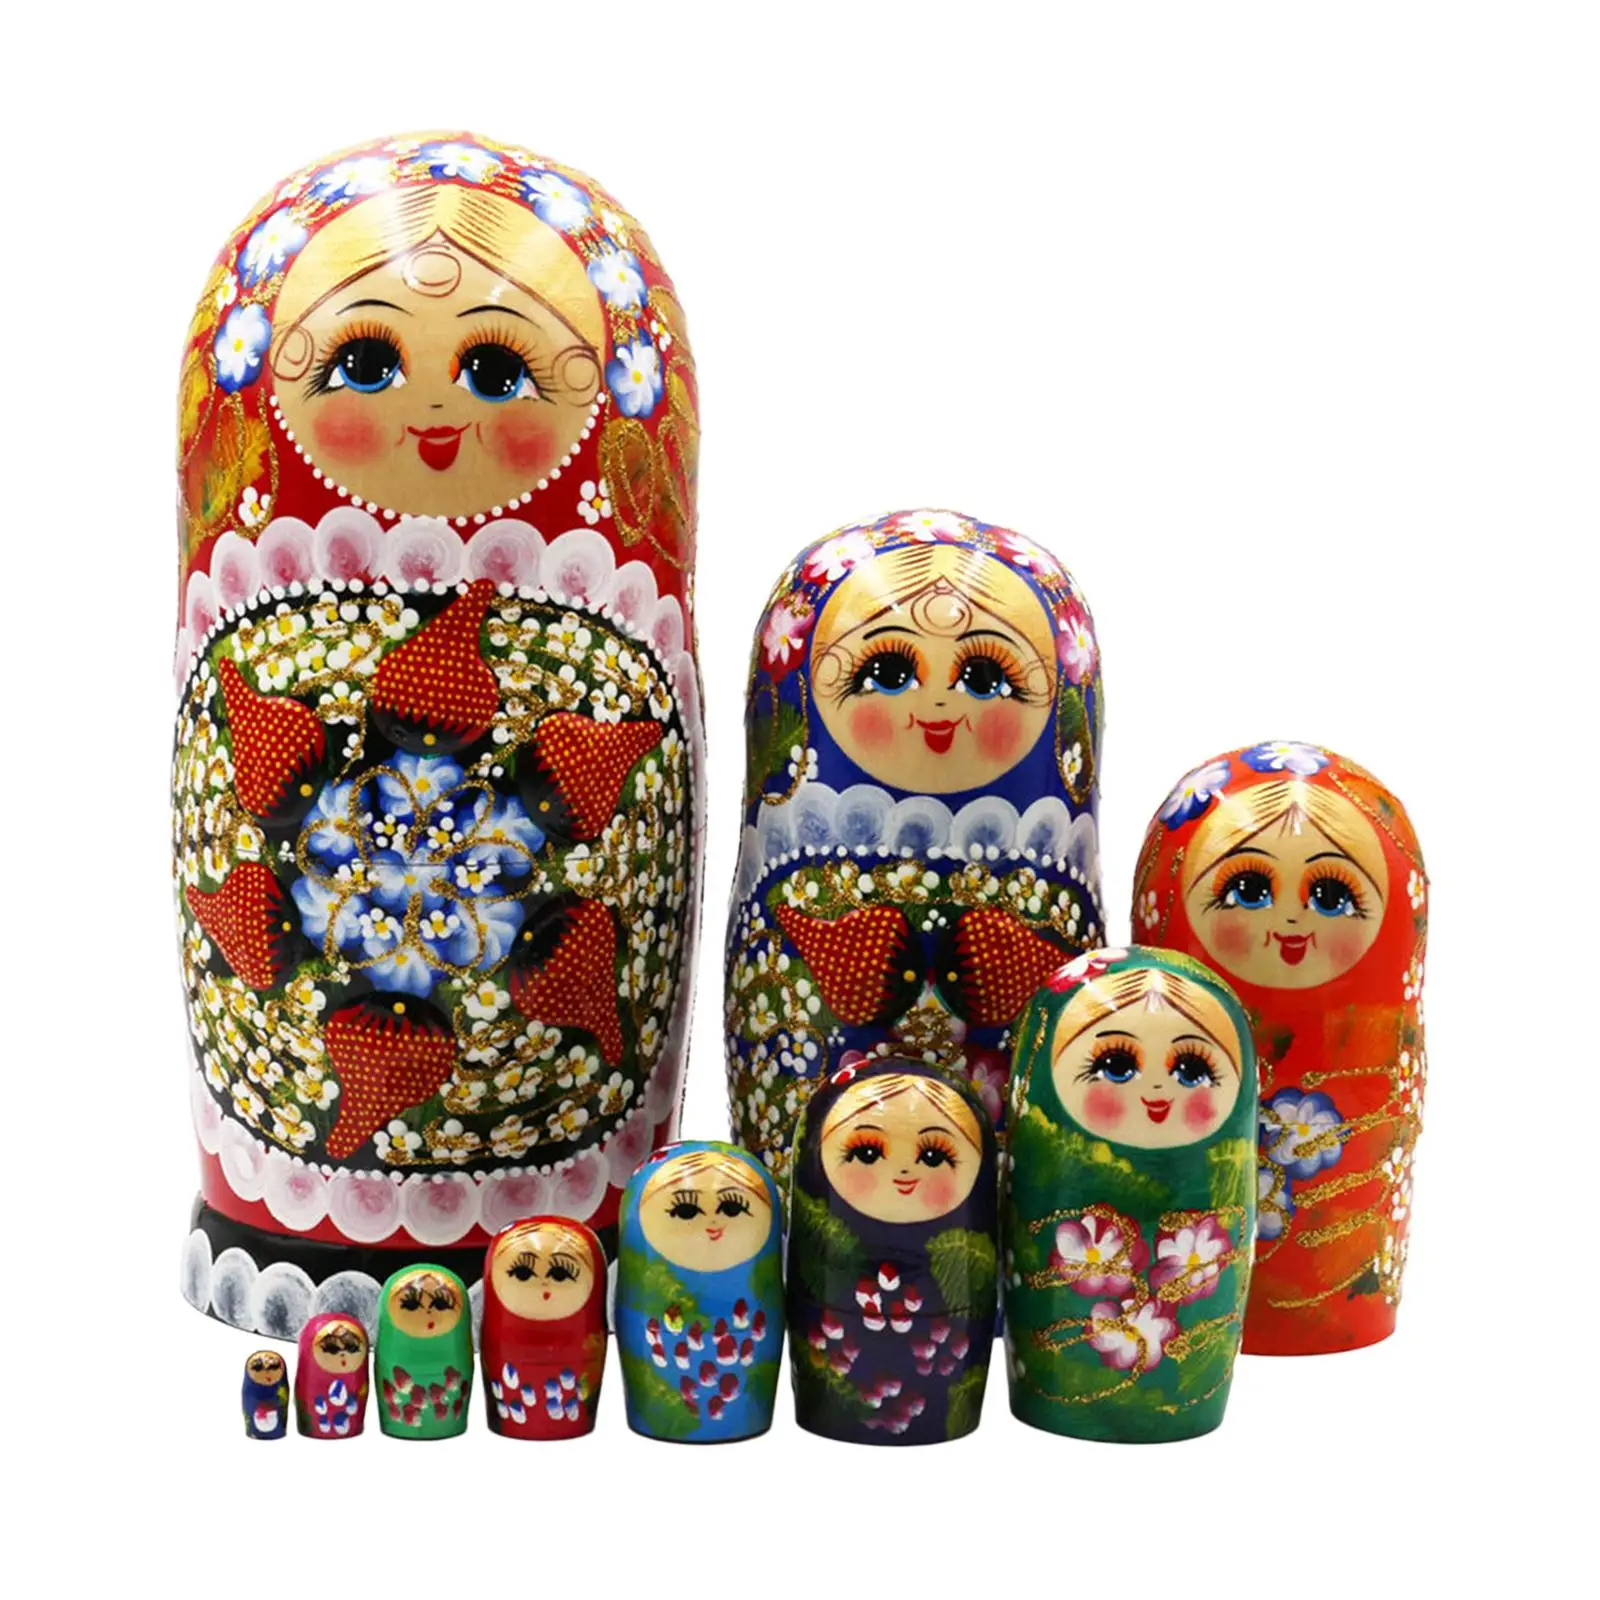 10Pcs Russian Nesting Dolls Stacking Doll Set Traditional Birthday Gifts Cute Matryoshka Handpainted for Holiday Decoration